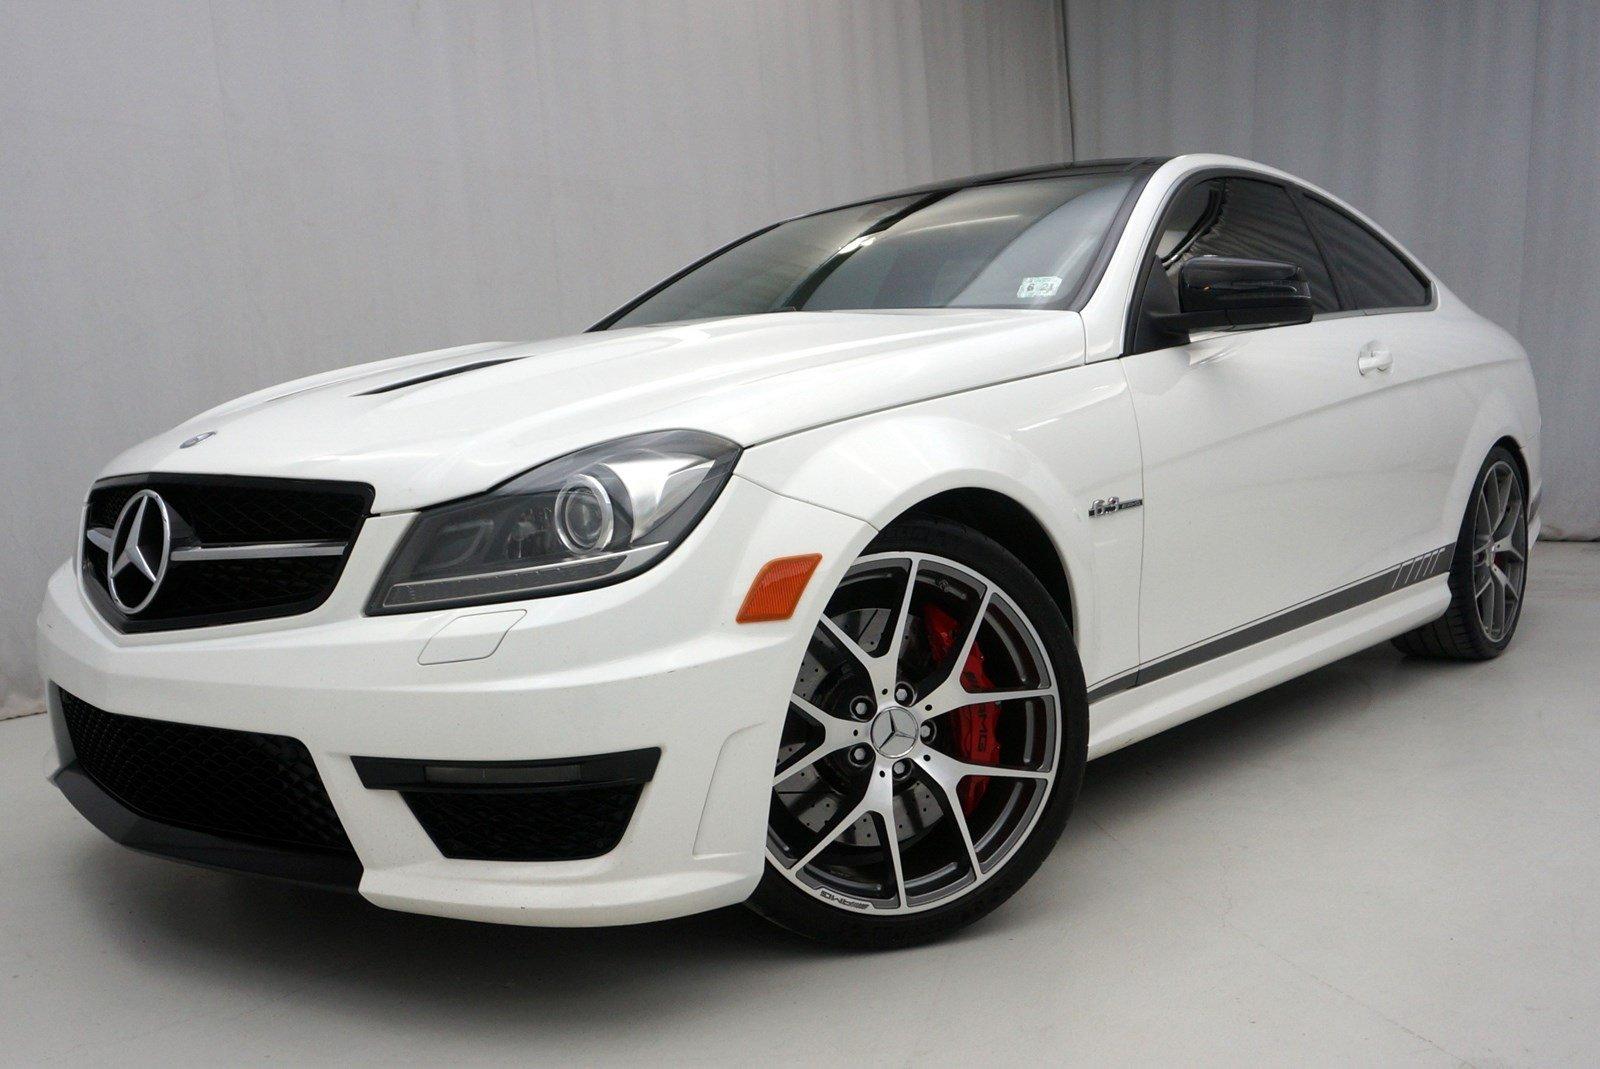 Used 2015 Mercedes Benz C63 Amg Edition 507 For Sale Sold Motorcars Of The Main Line Stock G409769